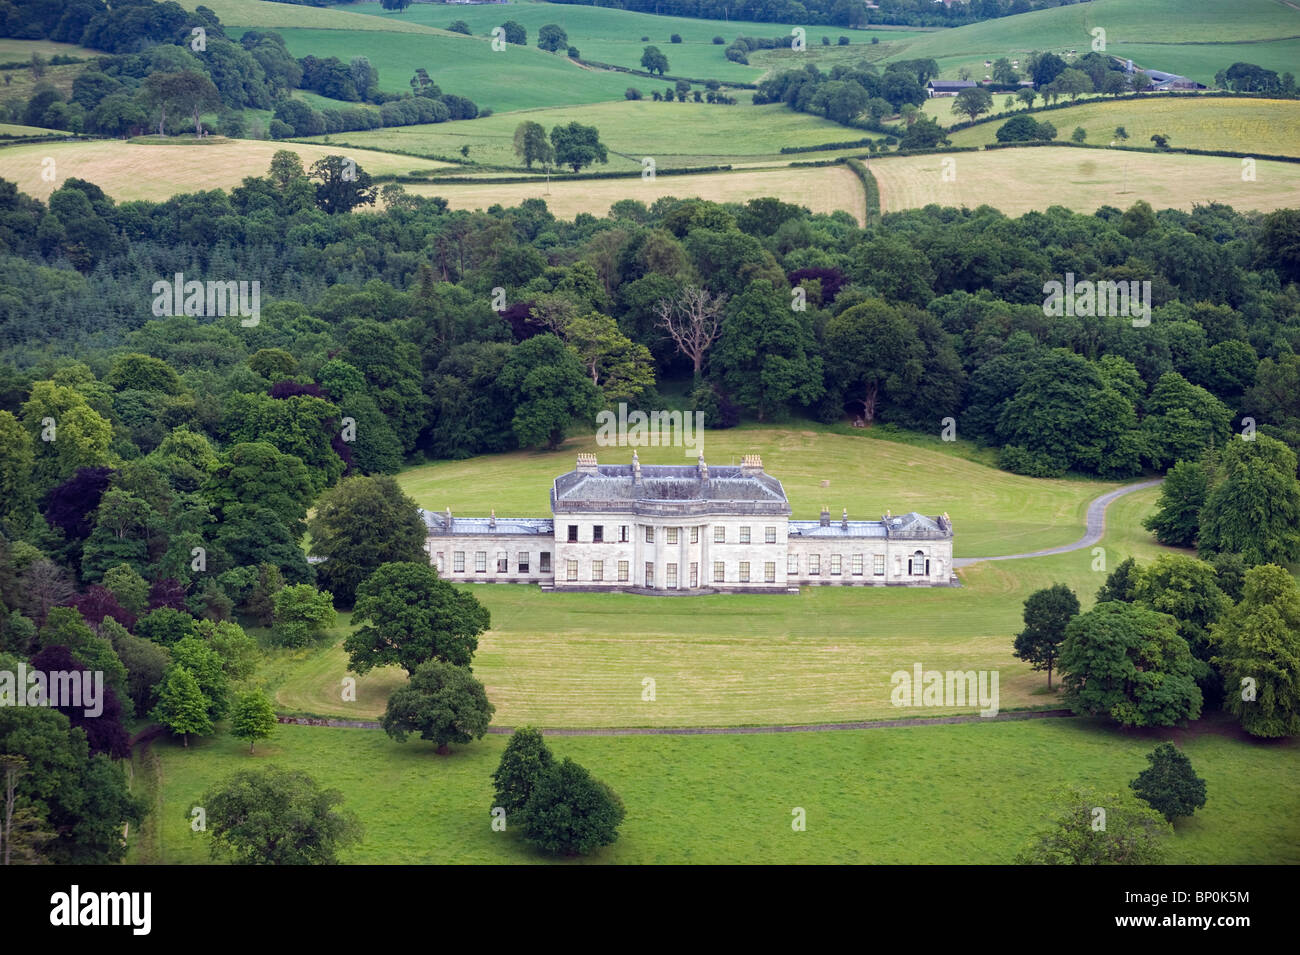 Northern Ireland, Fermanagh, Enniskillen. Aerial view of Castle Coole, a late C18th neo-classical Georgian mansion. Stock Photo